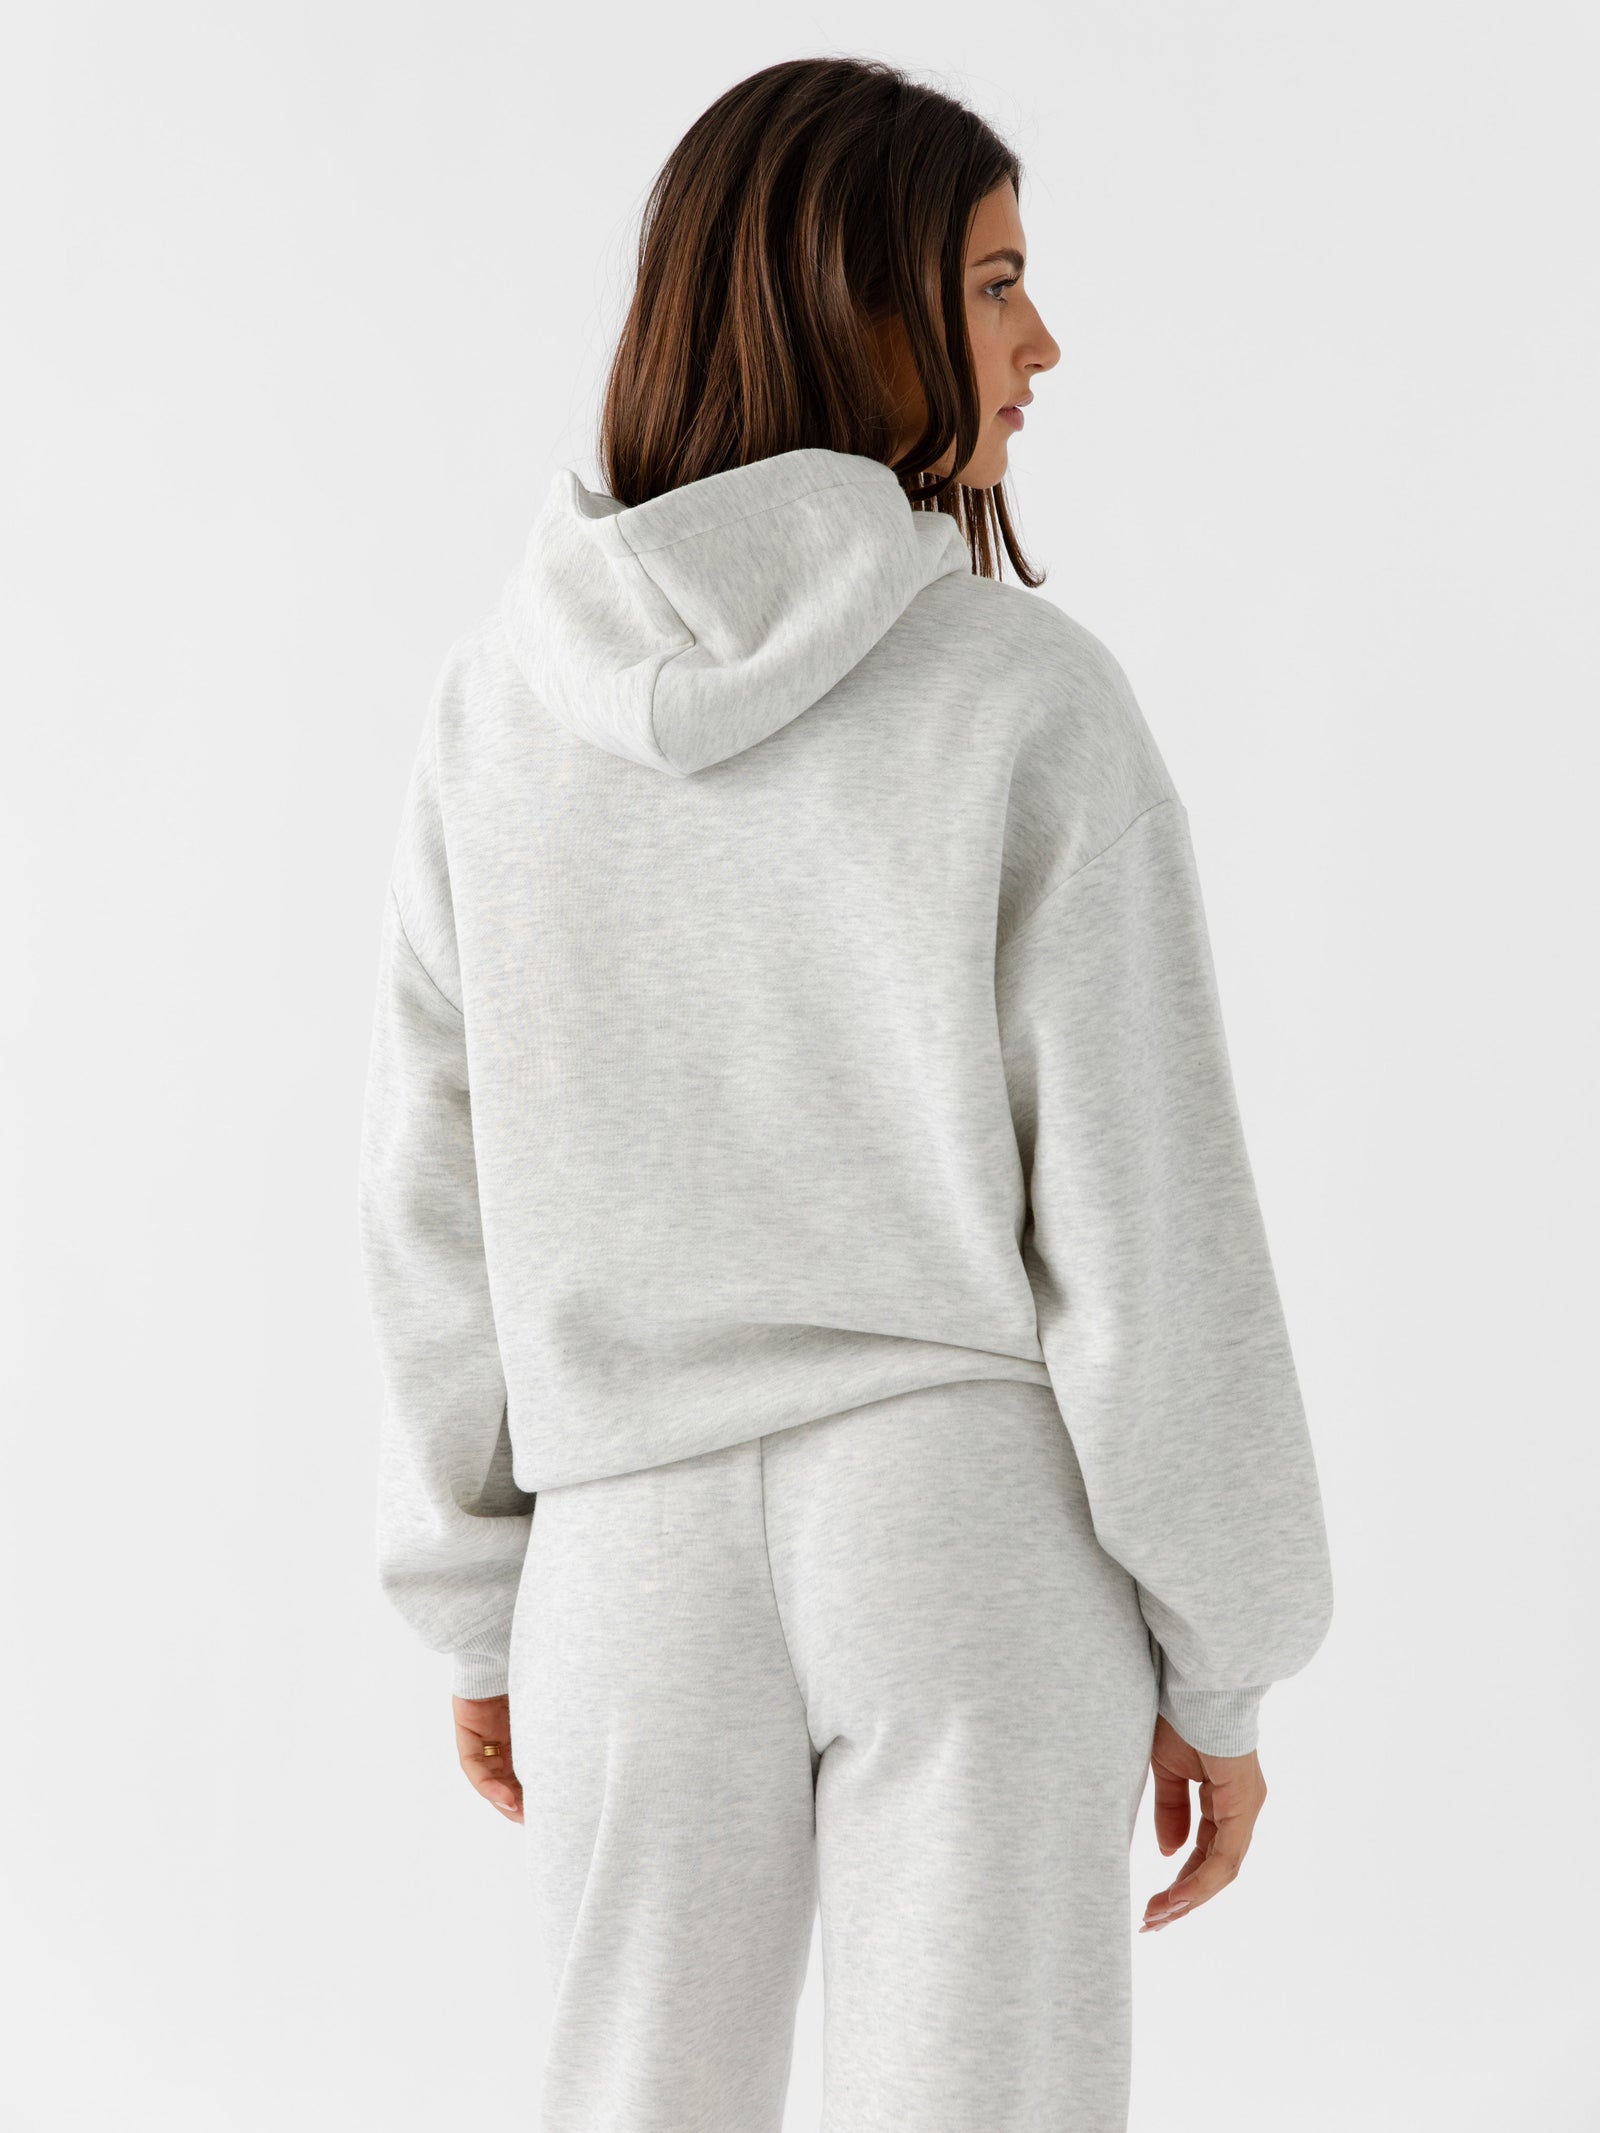 Back of woman wearing heather grey cityscape hoodie 